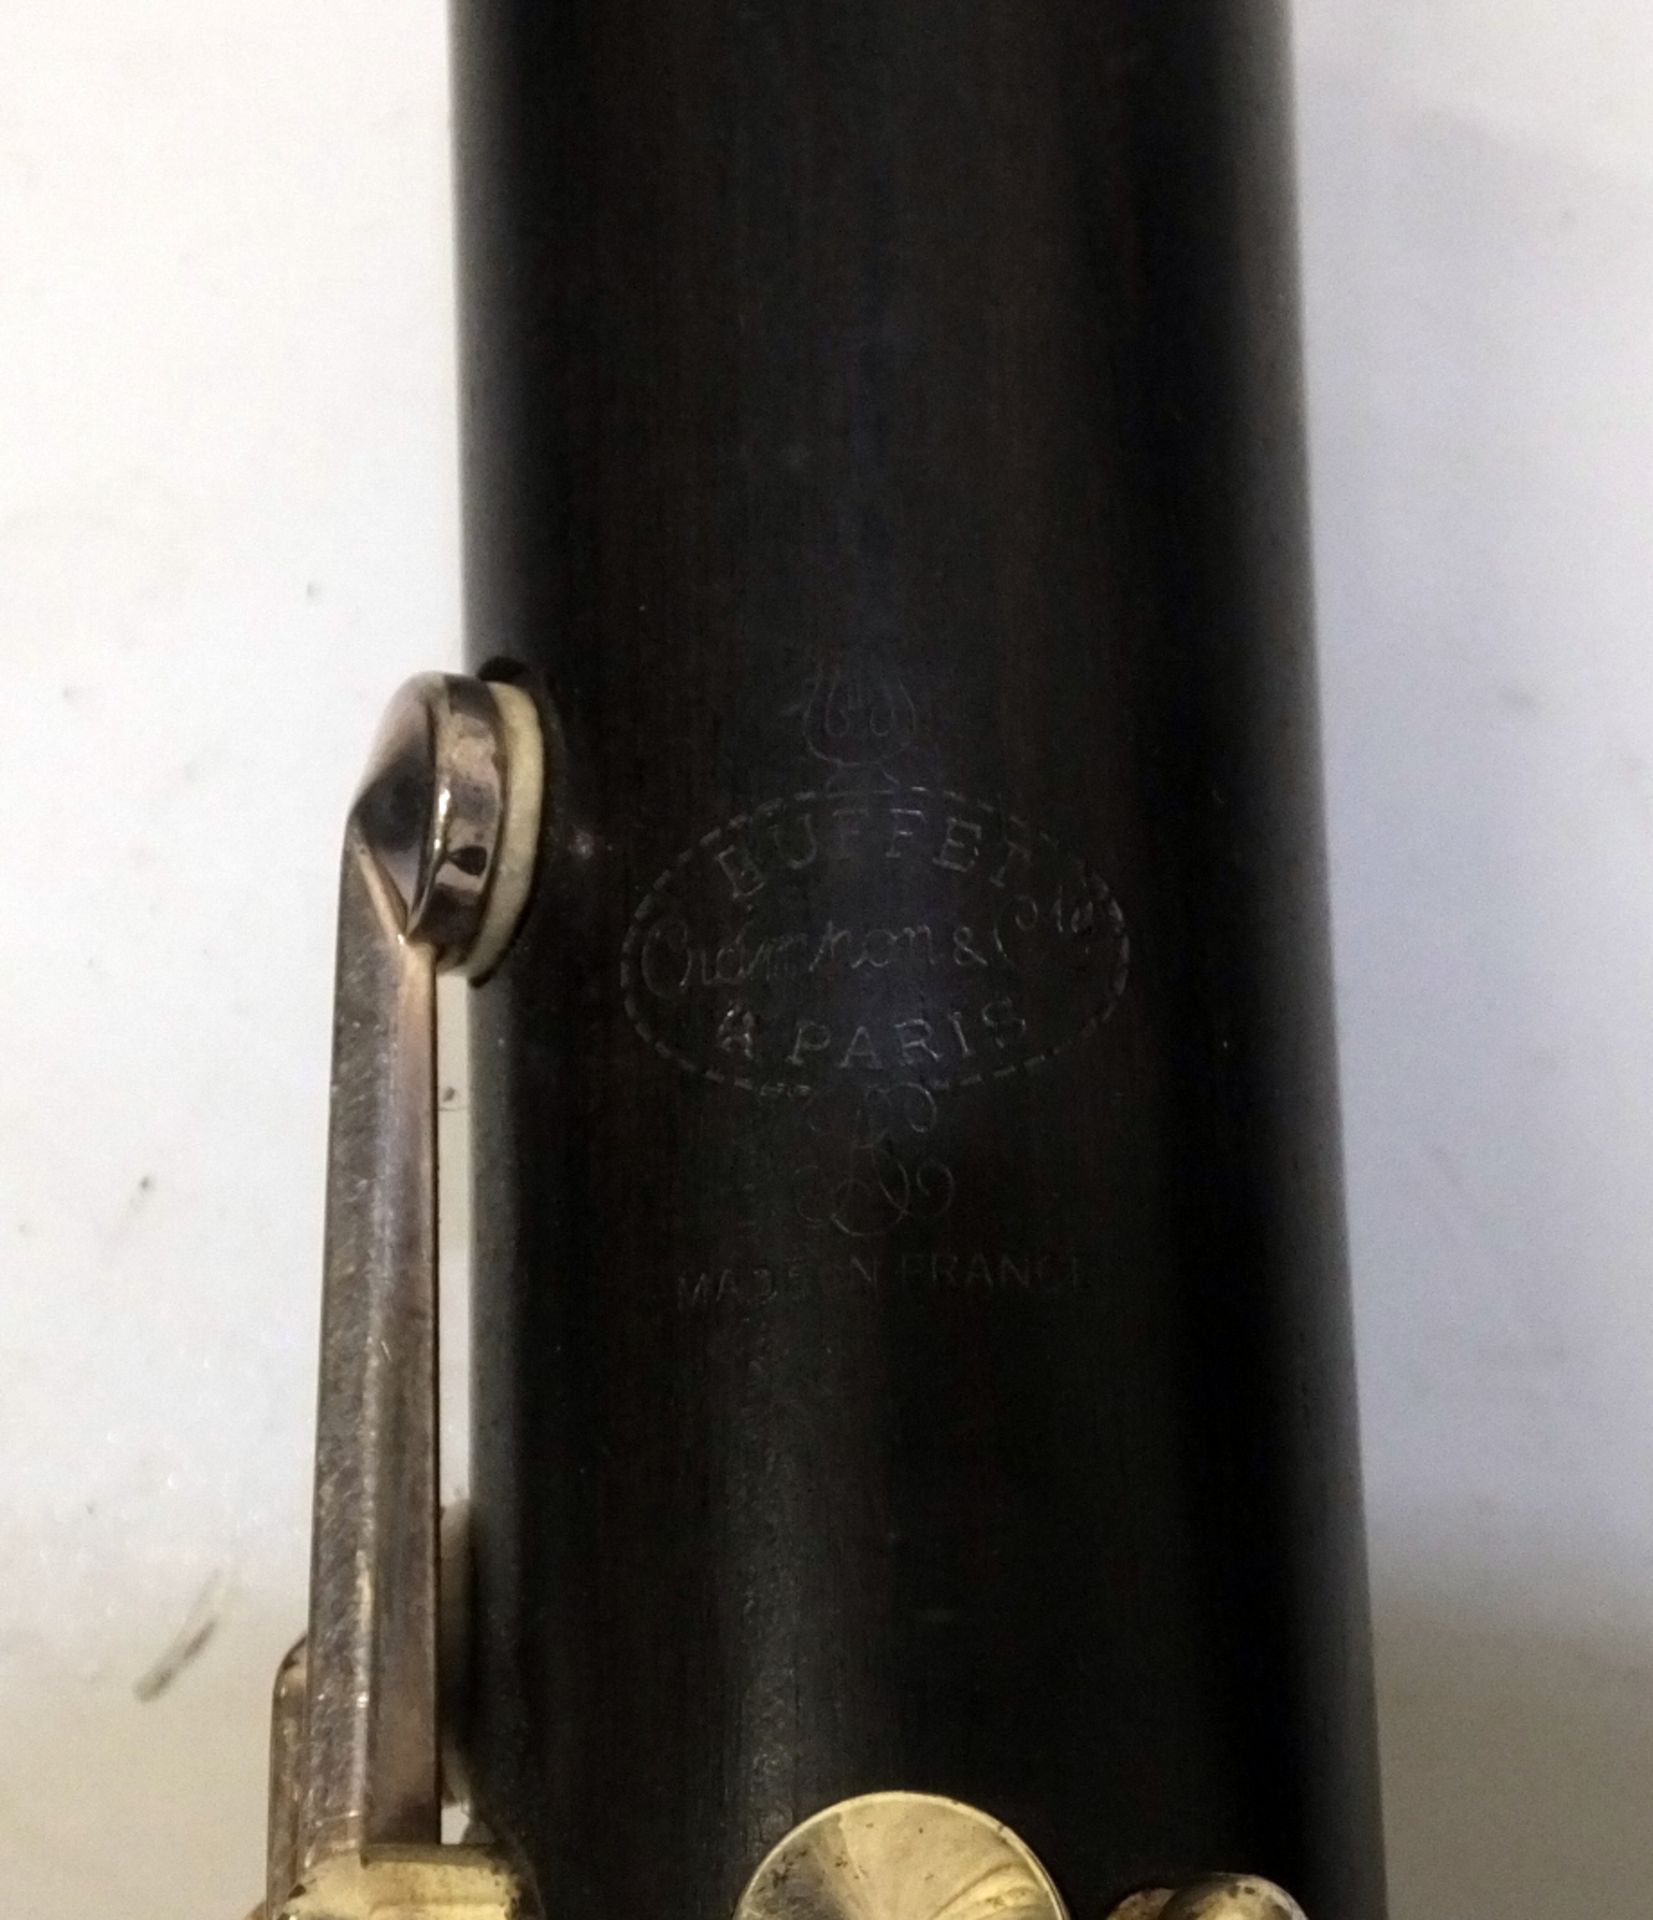 Buffet Crampon Clarinet (A) - Serial Number - 296072 - Image 6 of 10